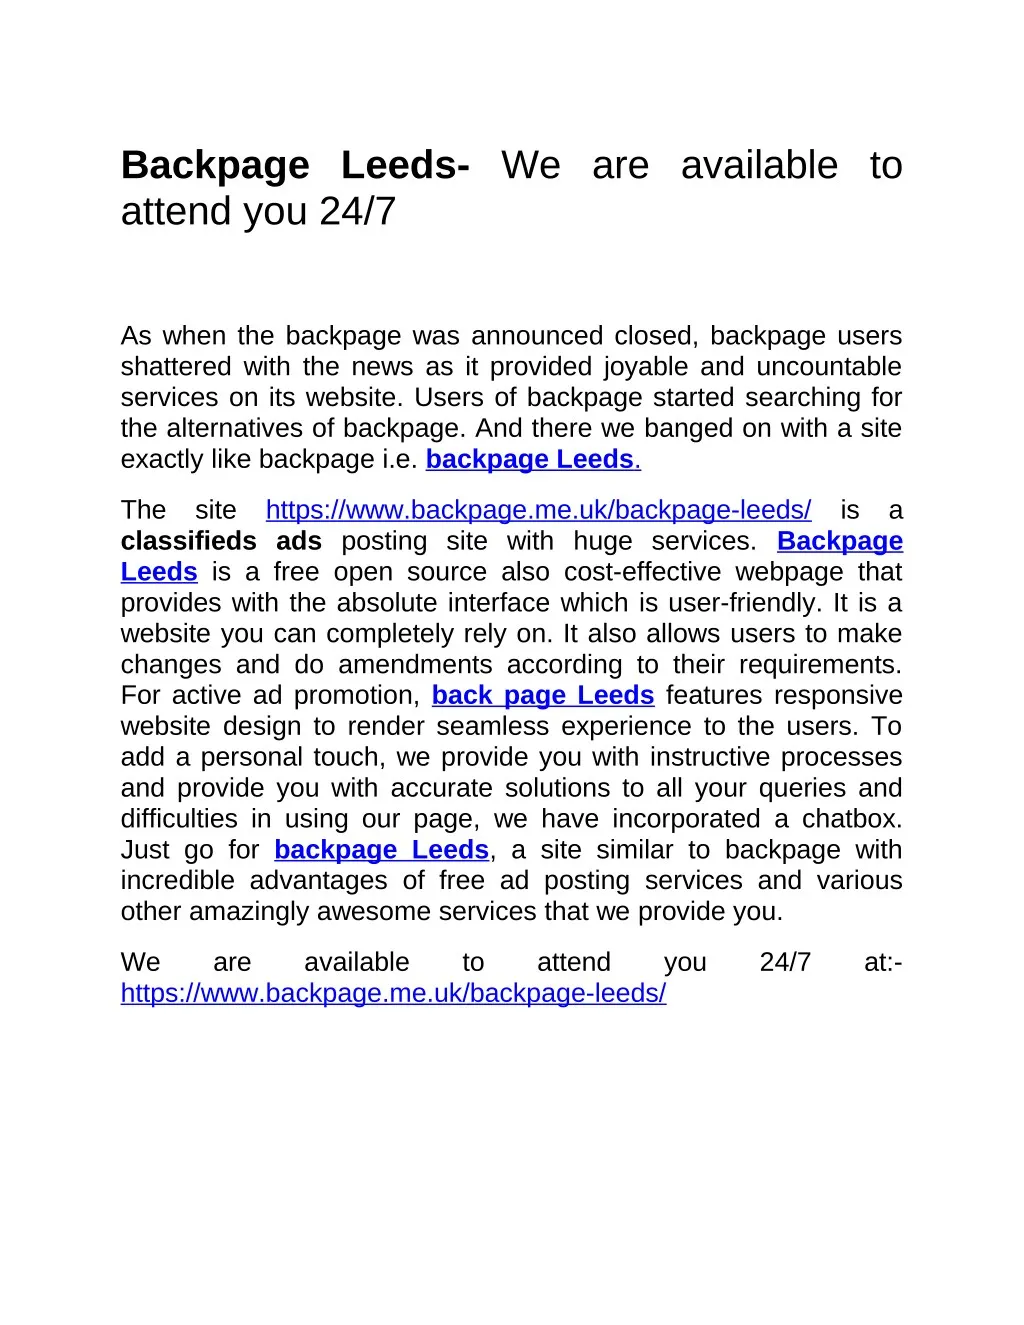 backpage leeds we are available to attend you 24 7